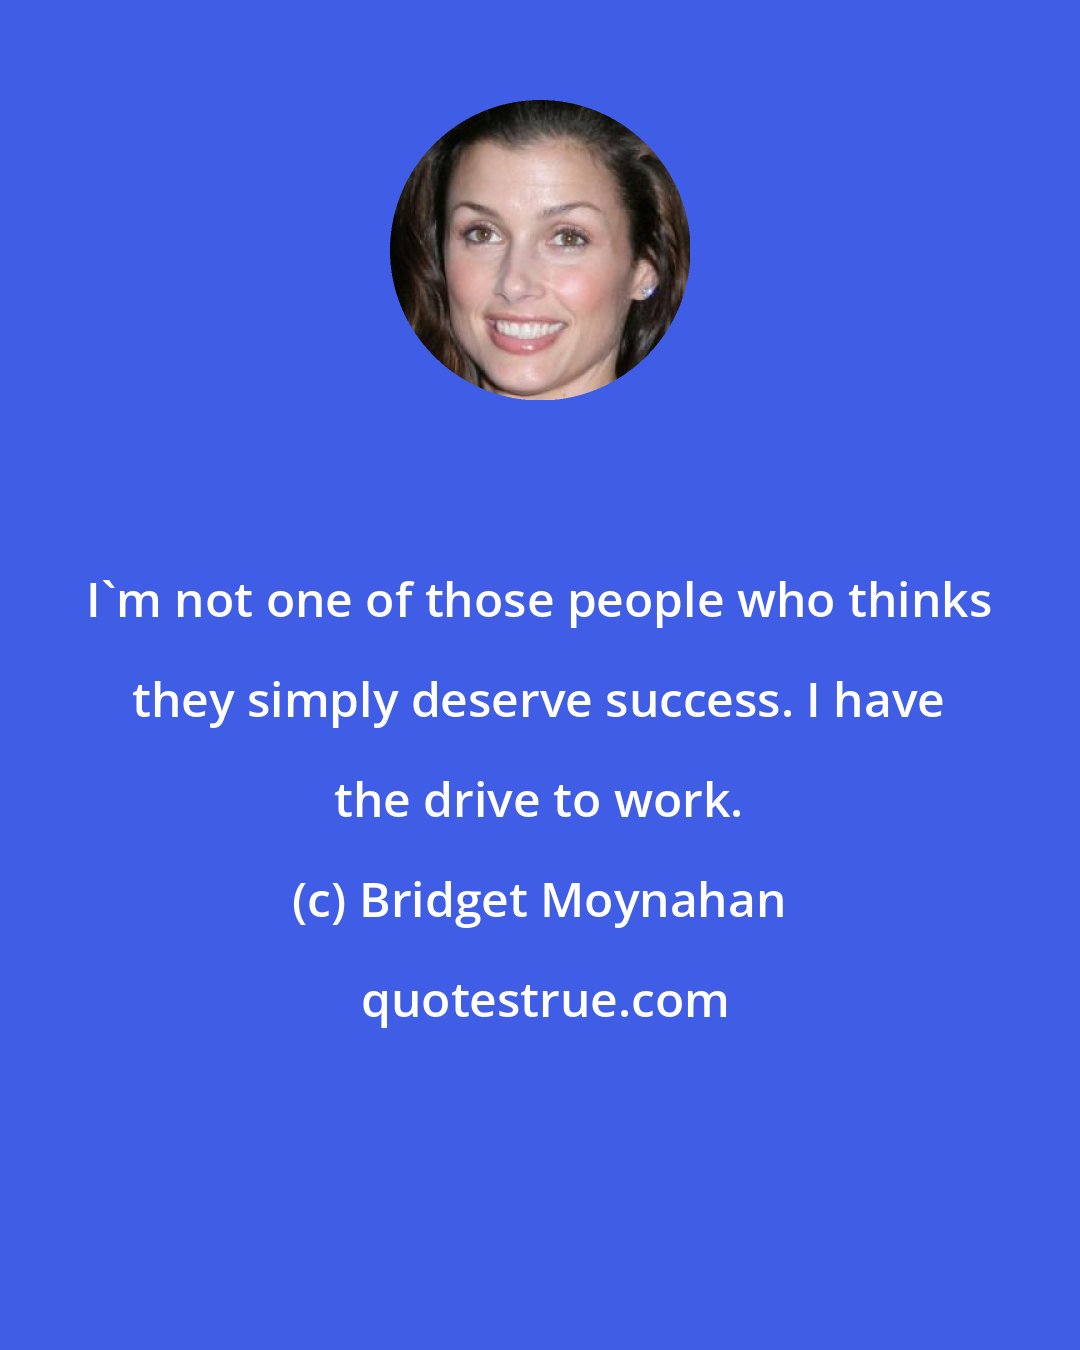 Bridget Moynahan: I'm not one of those people who thinks they simply deserve success. I have the drive to work.